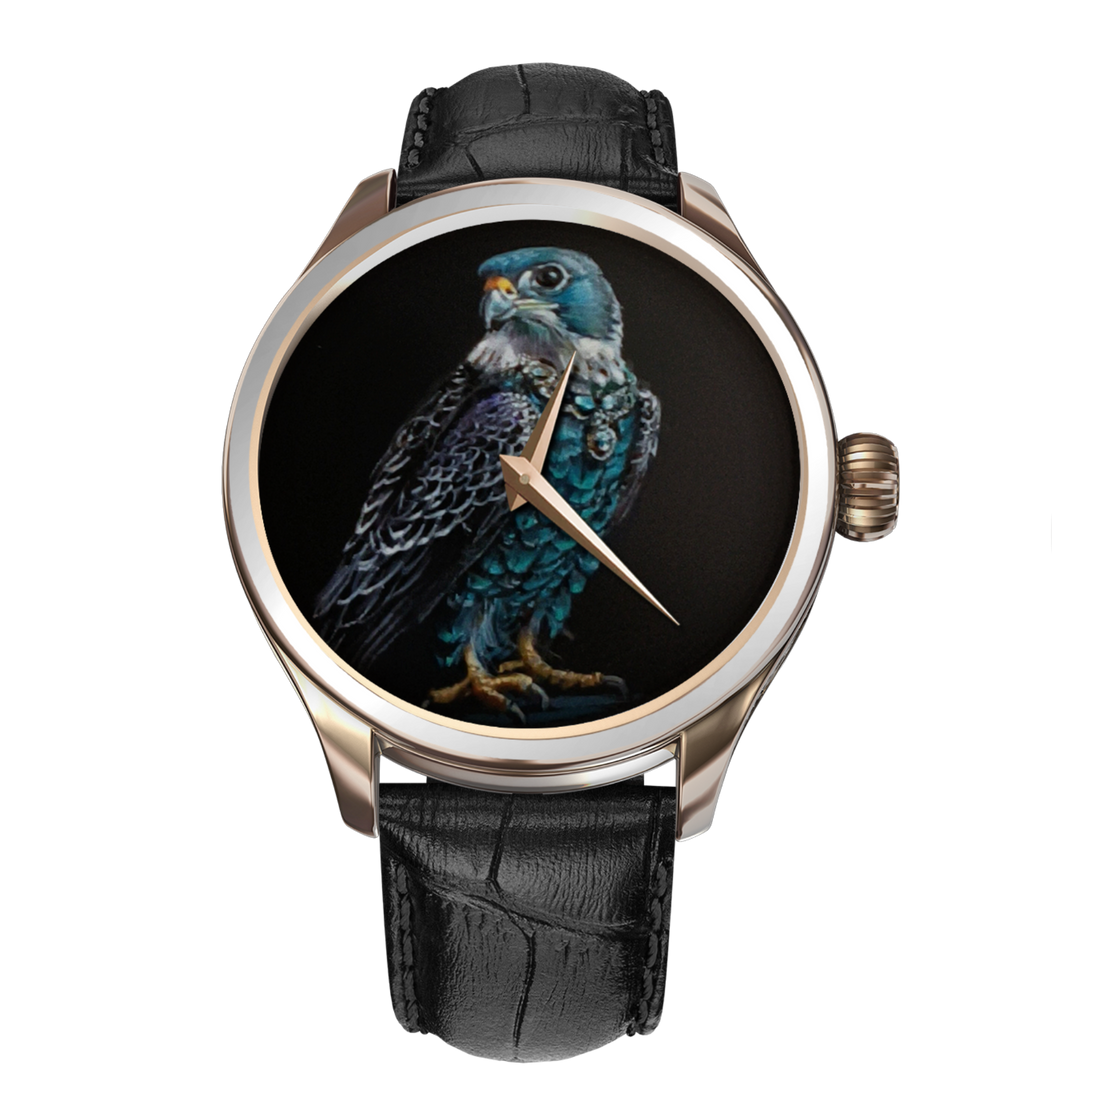 Introducing the B360 watch brand: Regal elegance embodied. The watch features a hand-painted falcon on the dial, a masterpiece of artistry with vibrant colors. Power, grace, and luxury converge in this exceptional timepiece. Own a unique statement of sophistication with the B360 watch, where majestic allure meets horological excellence.